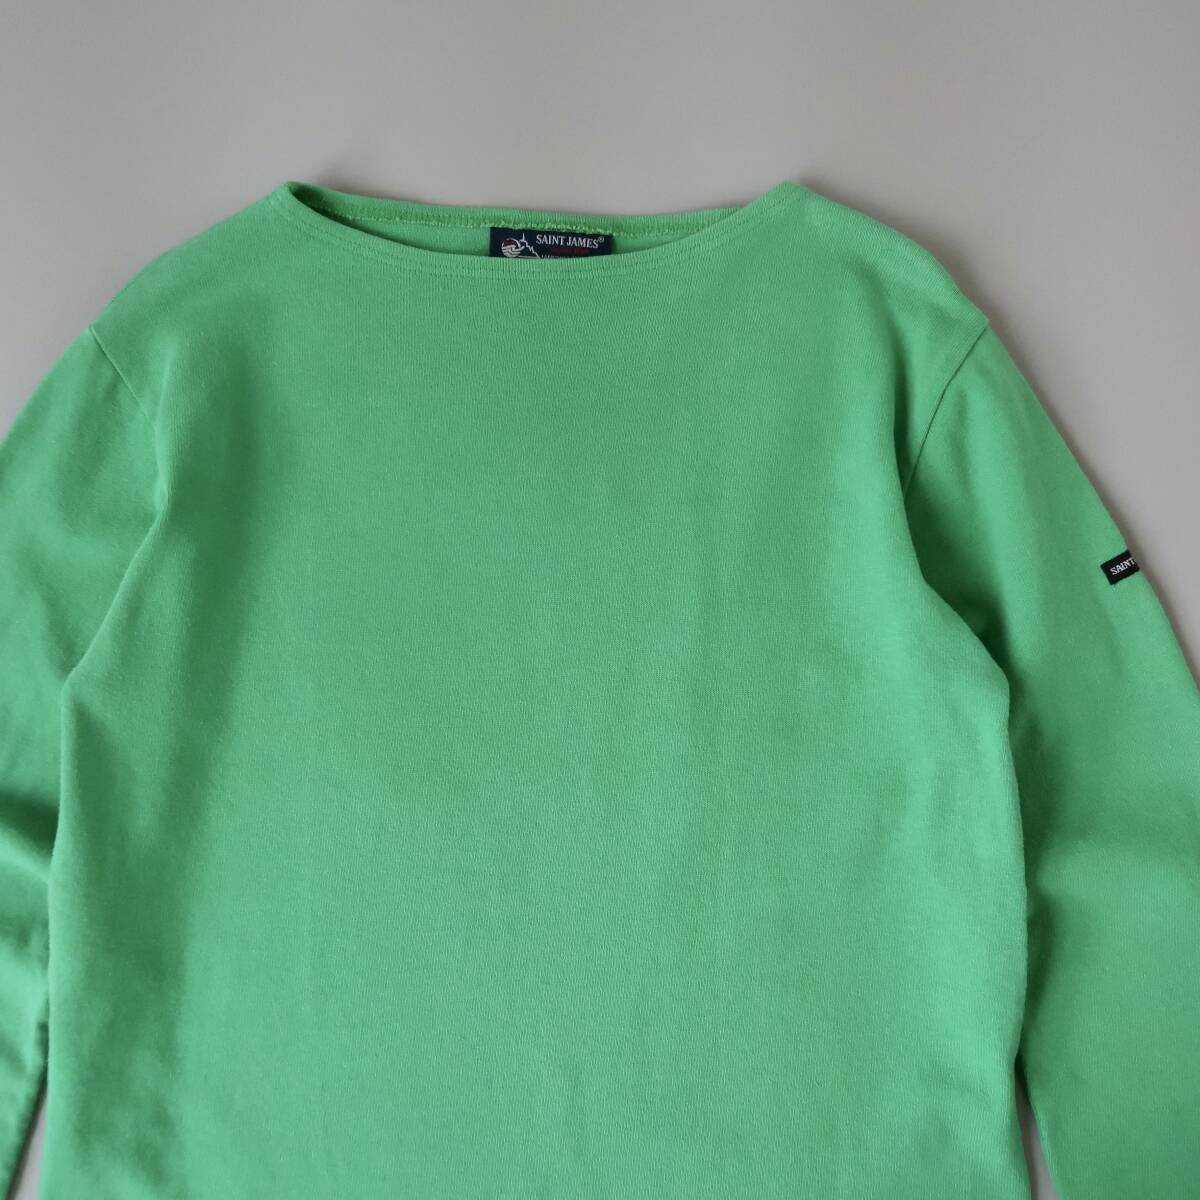 [SAINT JAMES Wesson green Apple solid bus k shirt inscription 3.5/SM France made ] St. James green undecorated fabric blue apple 